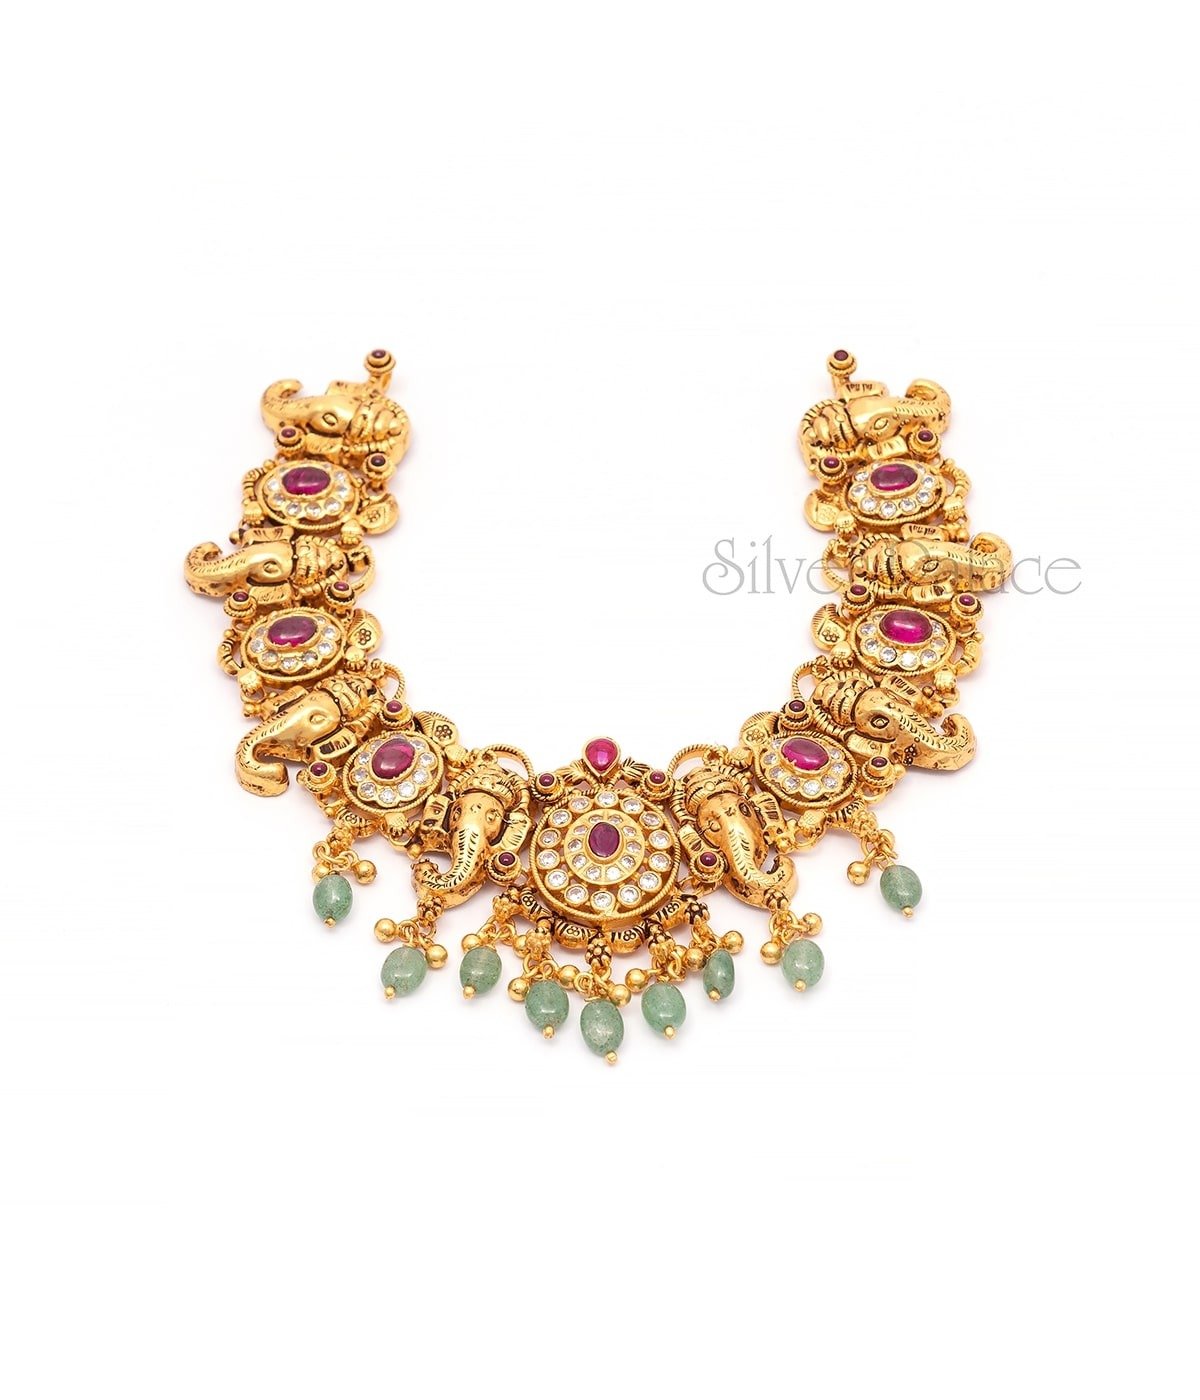 GOLD PLATED KUNDAN STONE GANESH NECKLACE IN SILVER 